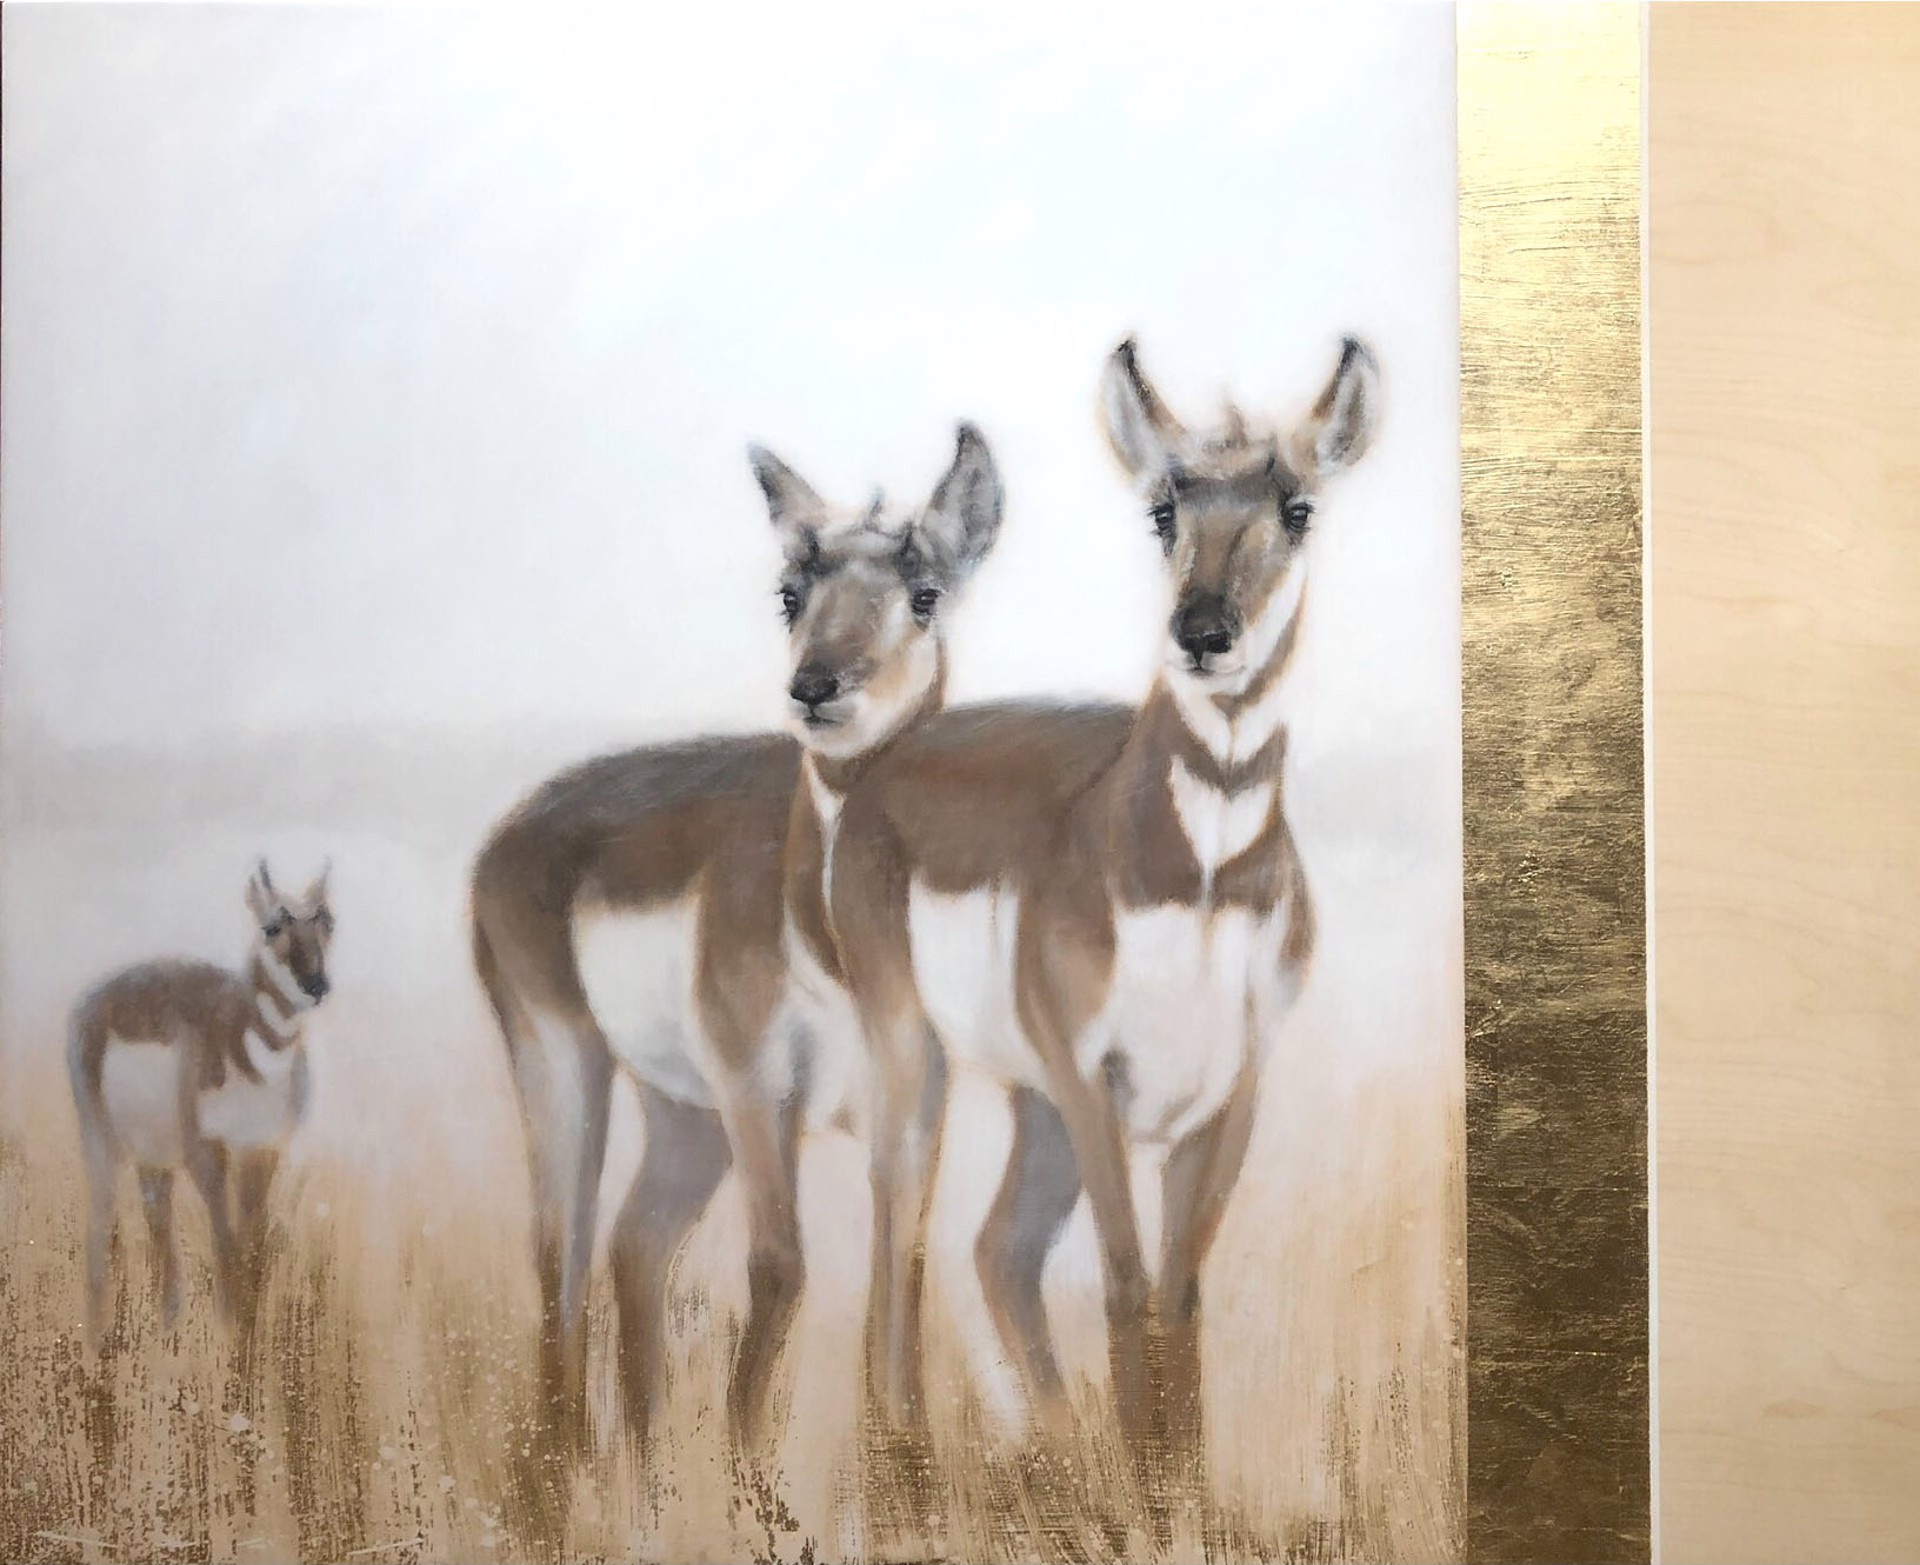 Original Artwork Featuring Pronghorn Deer And Contemporary Gold And Wood Background